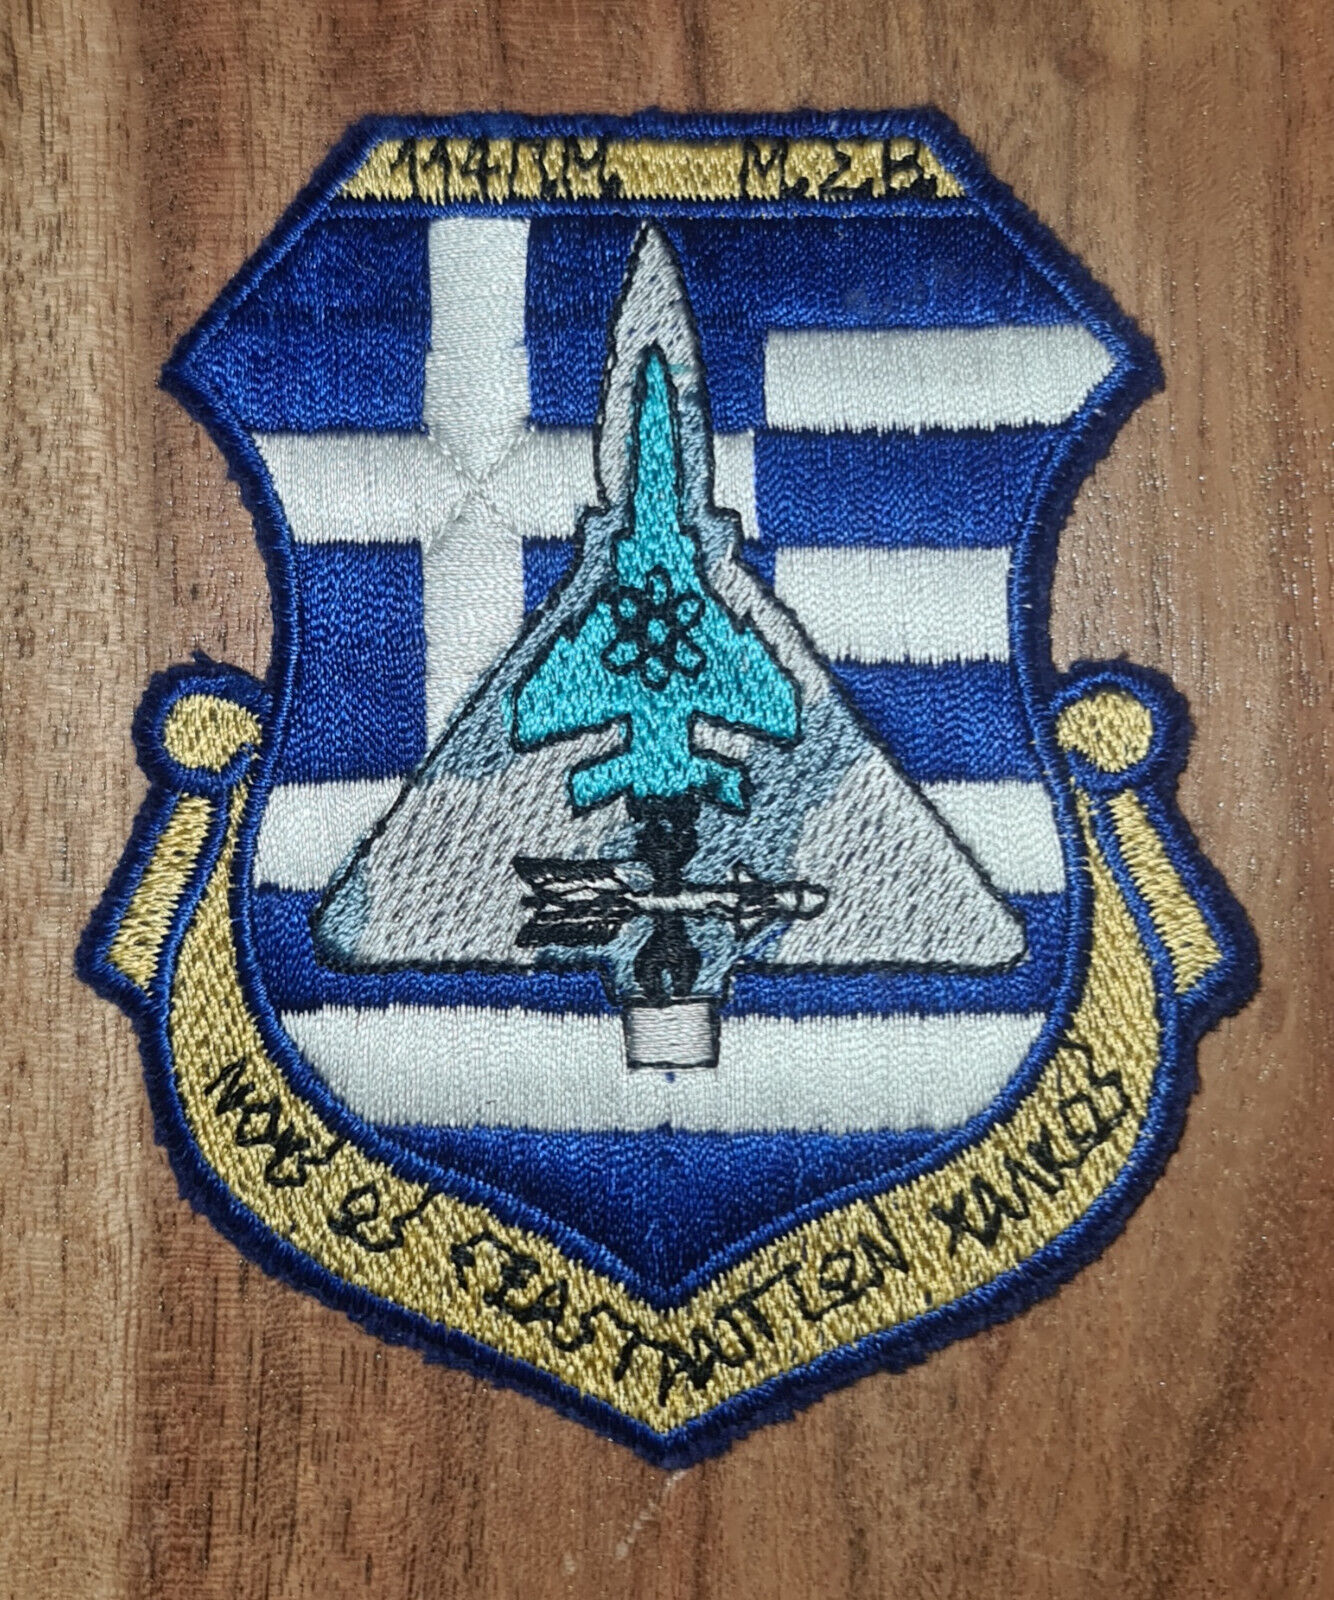 Mirage F-1 / Mirage 2000 Hellenic Airforce 114 CW maintenance patch badge